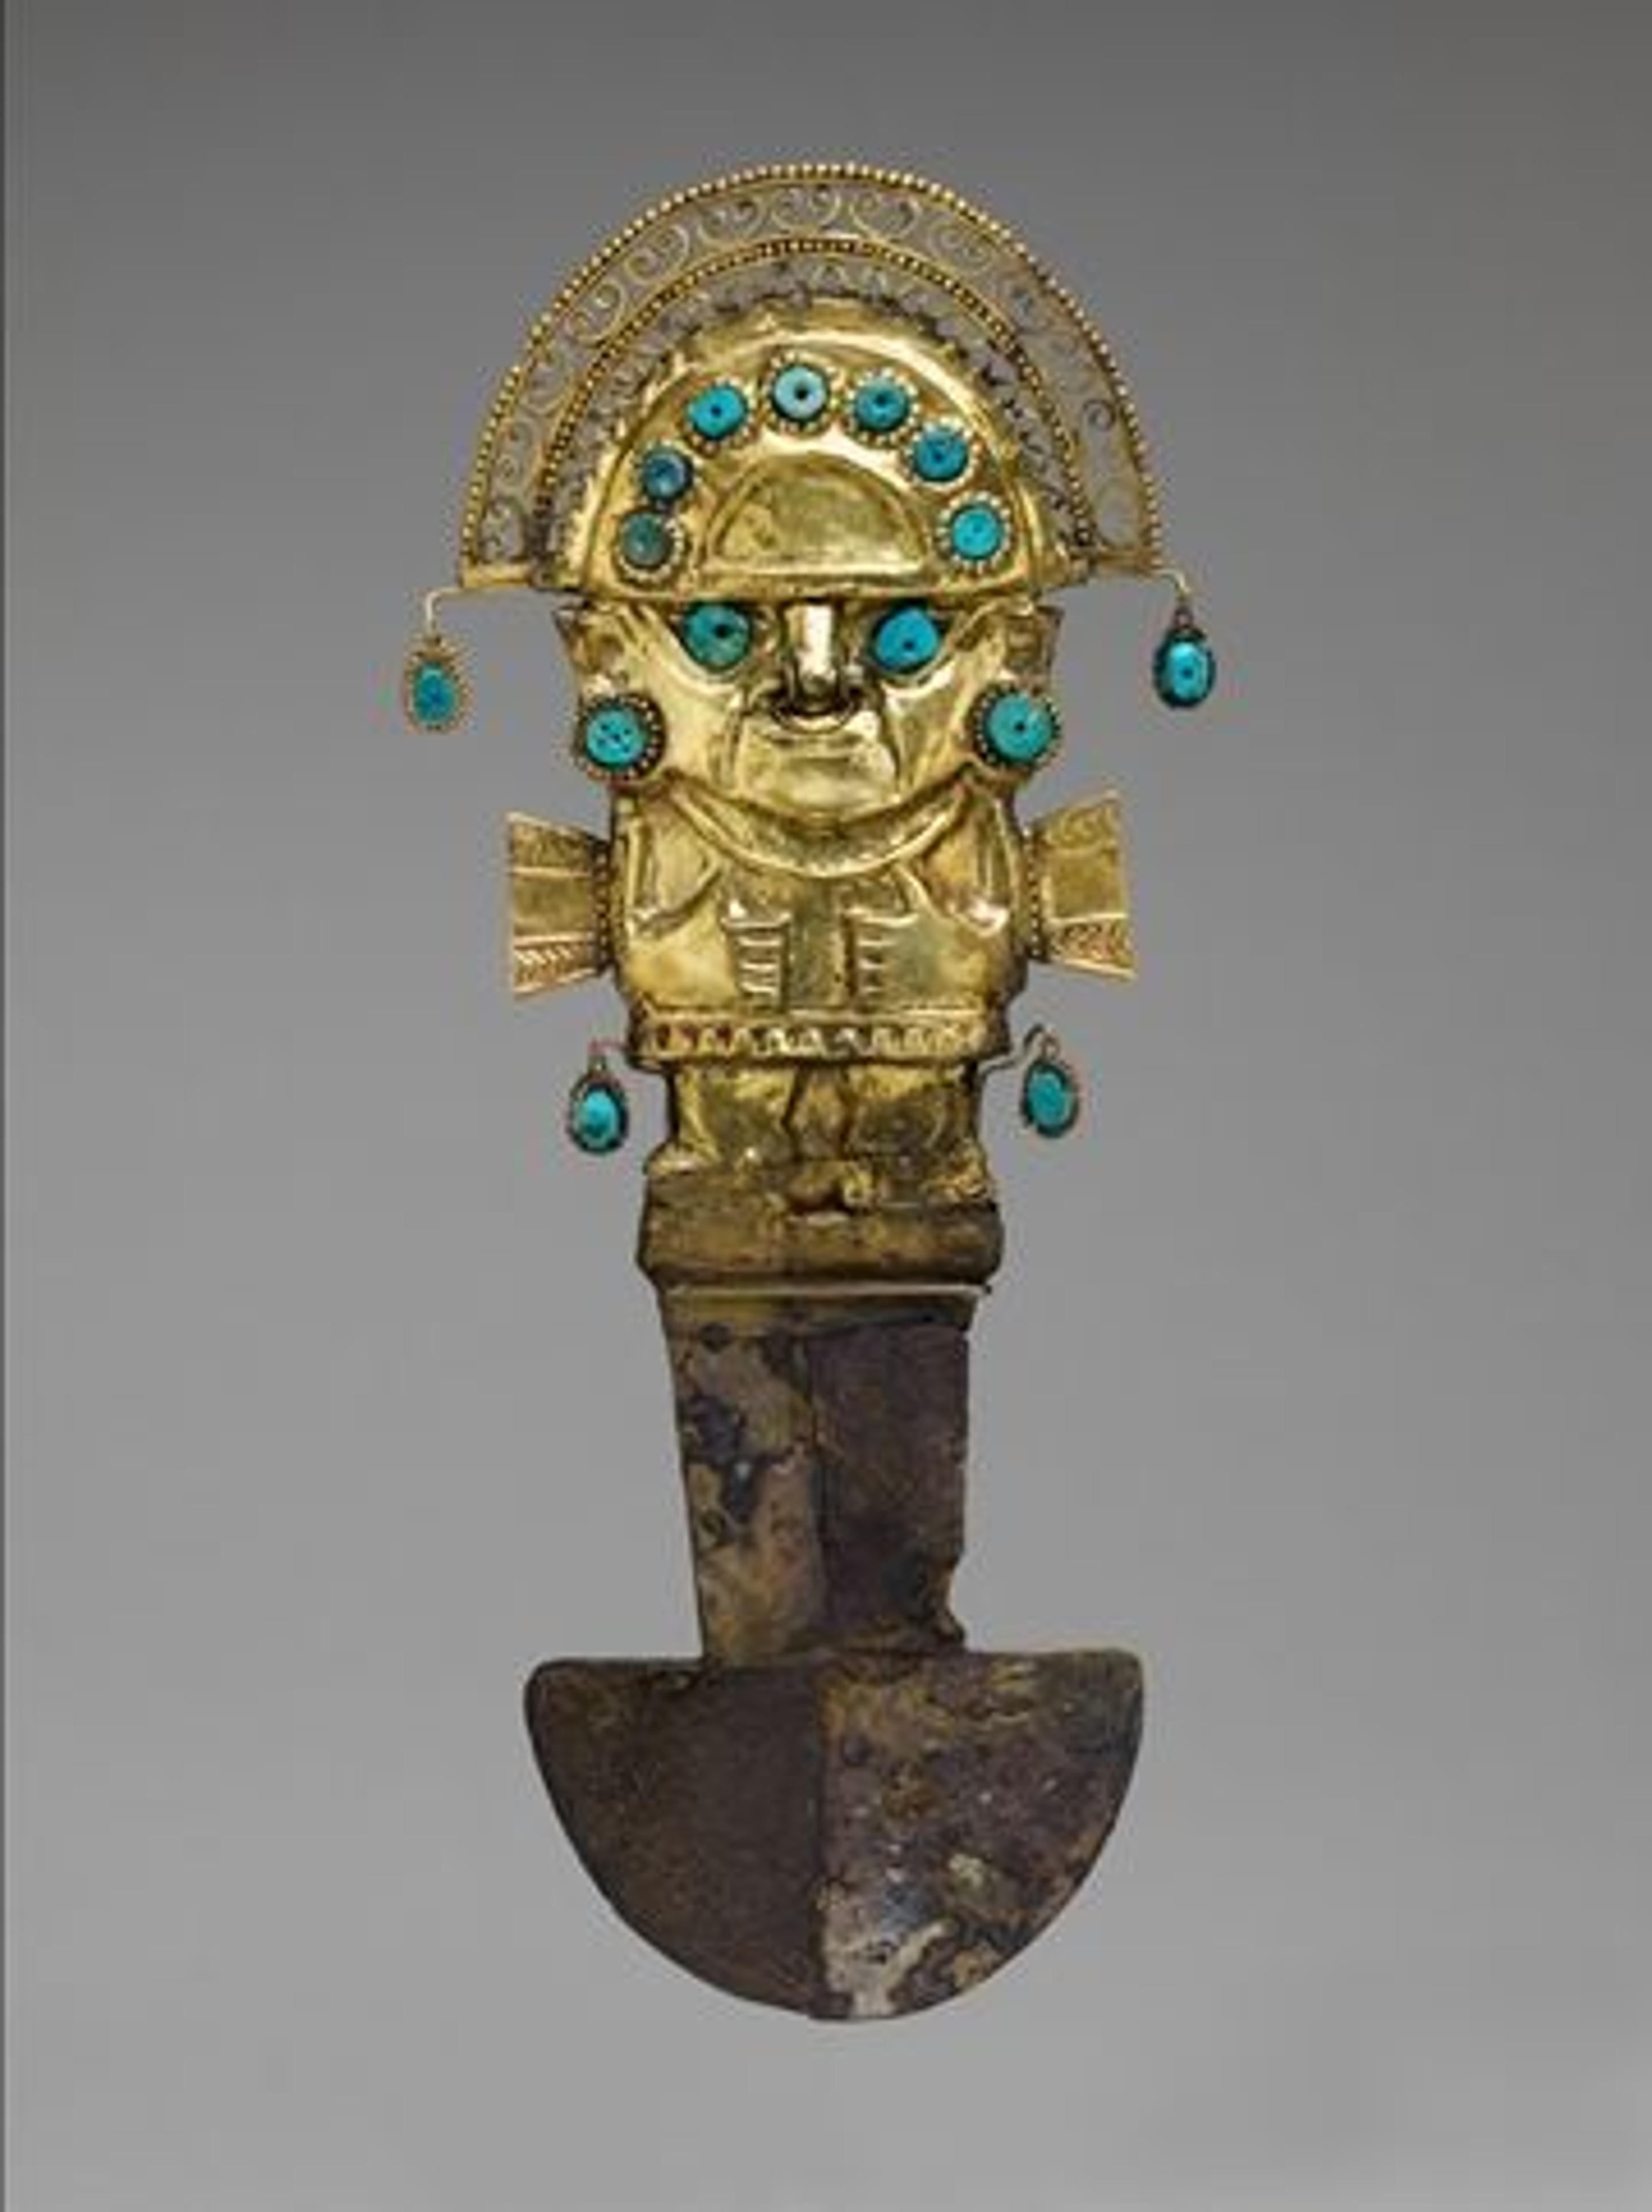 A gold and silver ceremonial knife from the ancient Americas